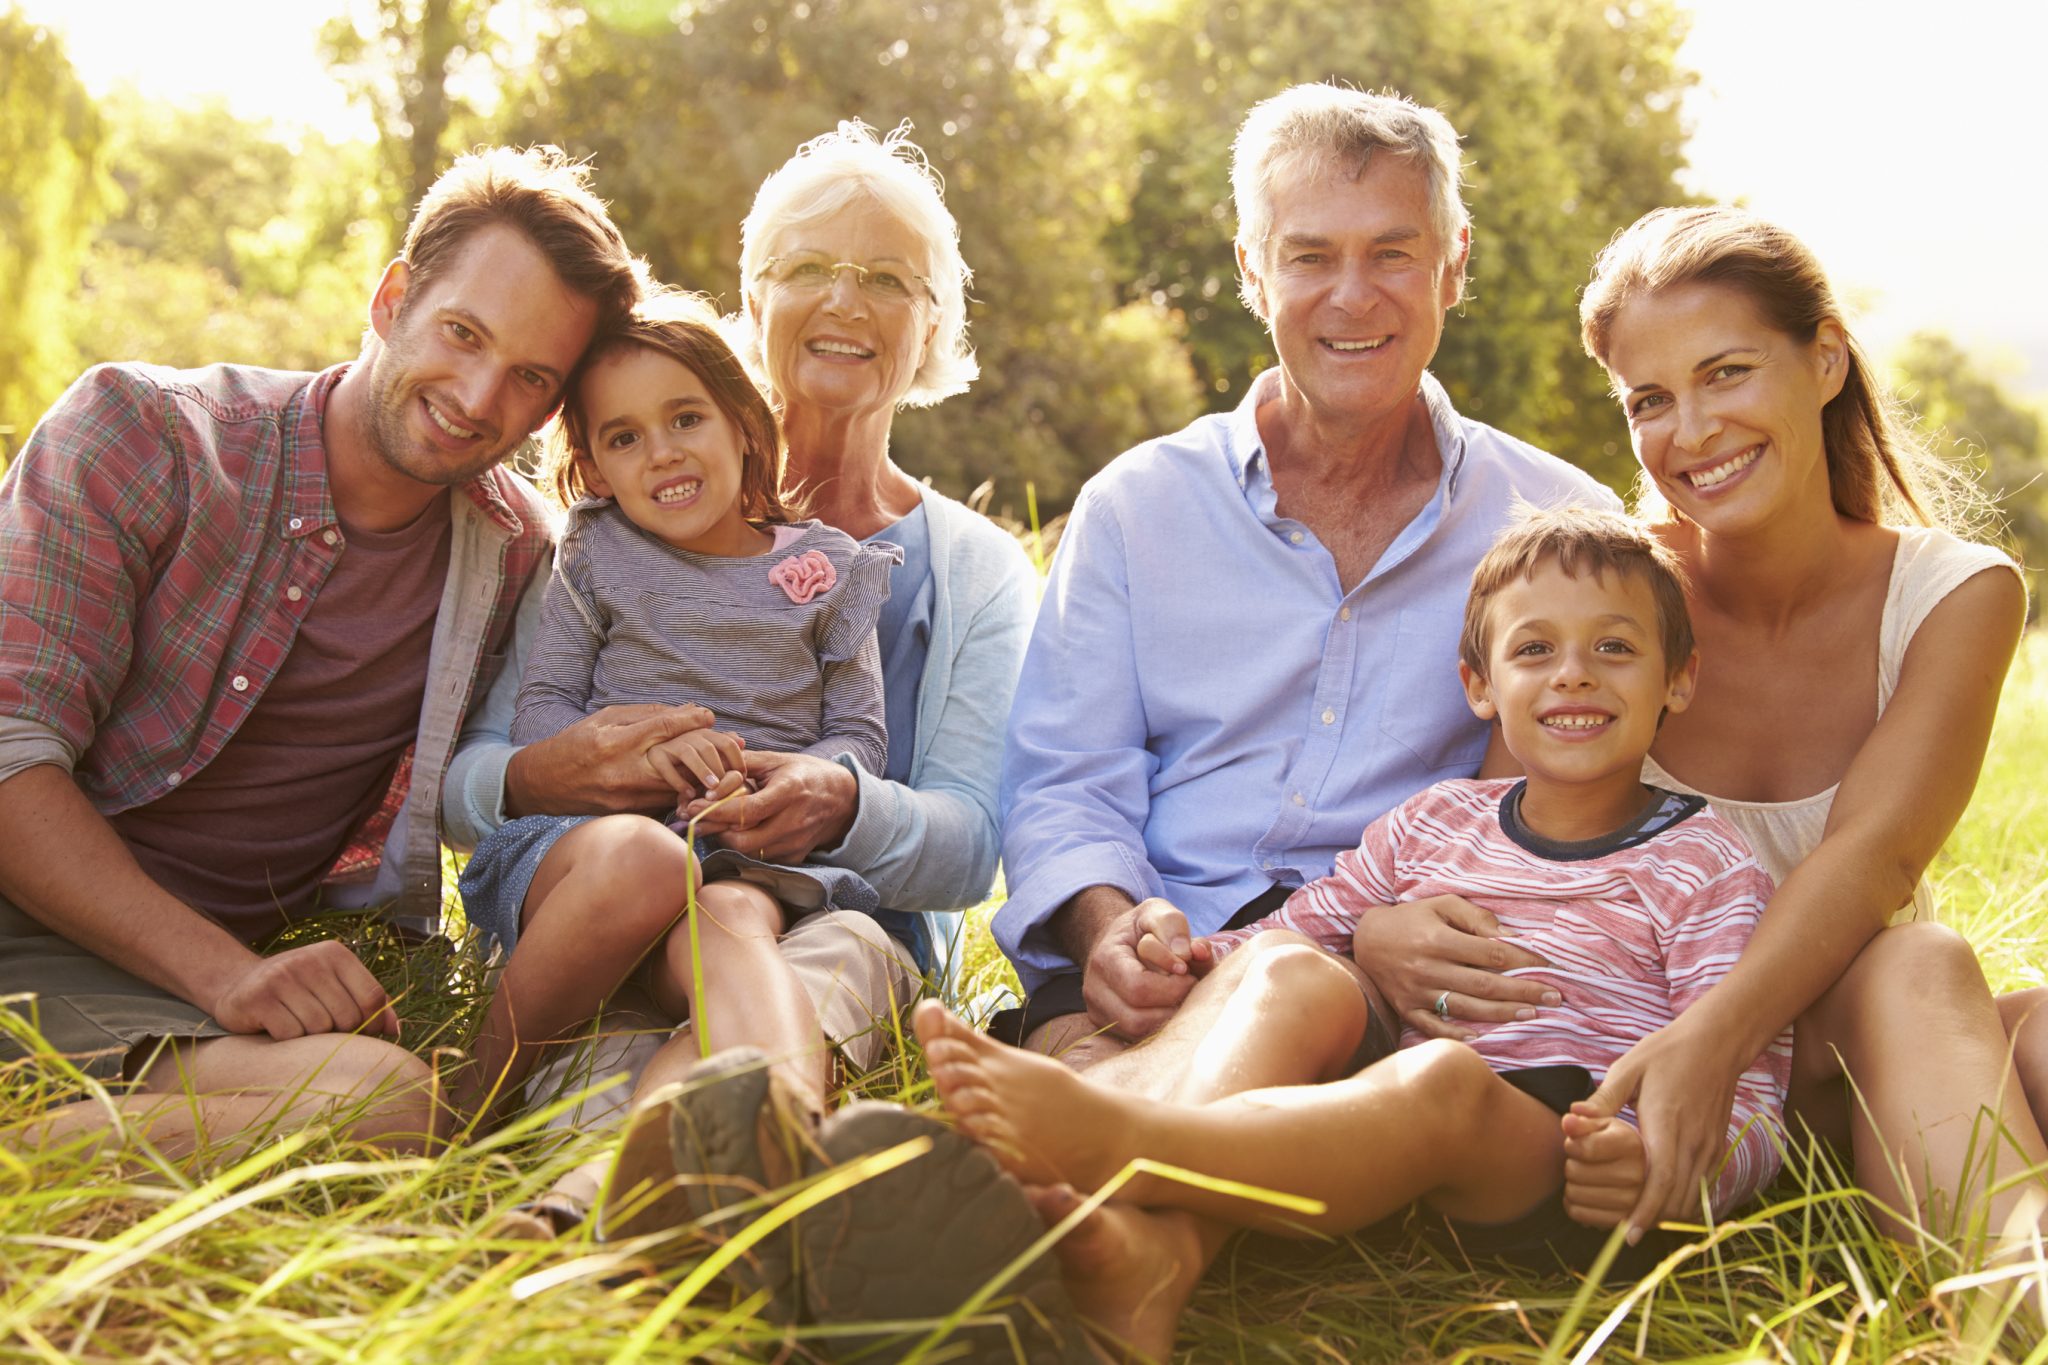 Multi-generation family relaxing together outdoors, smiling to camera